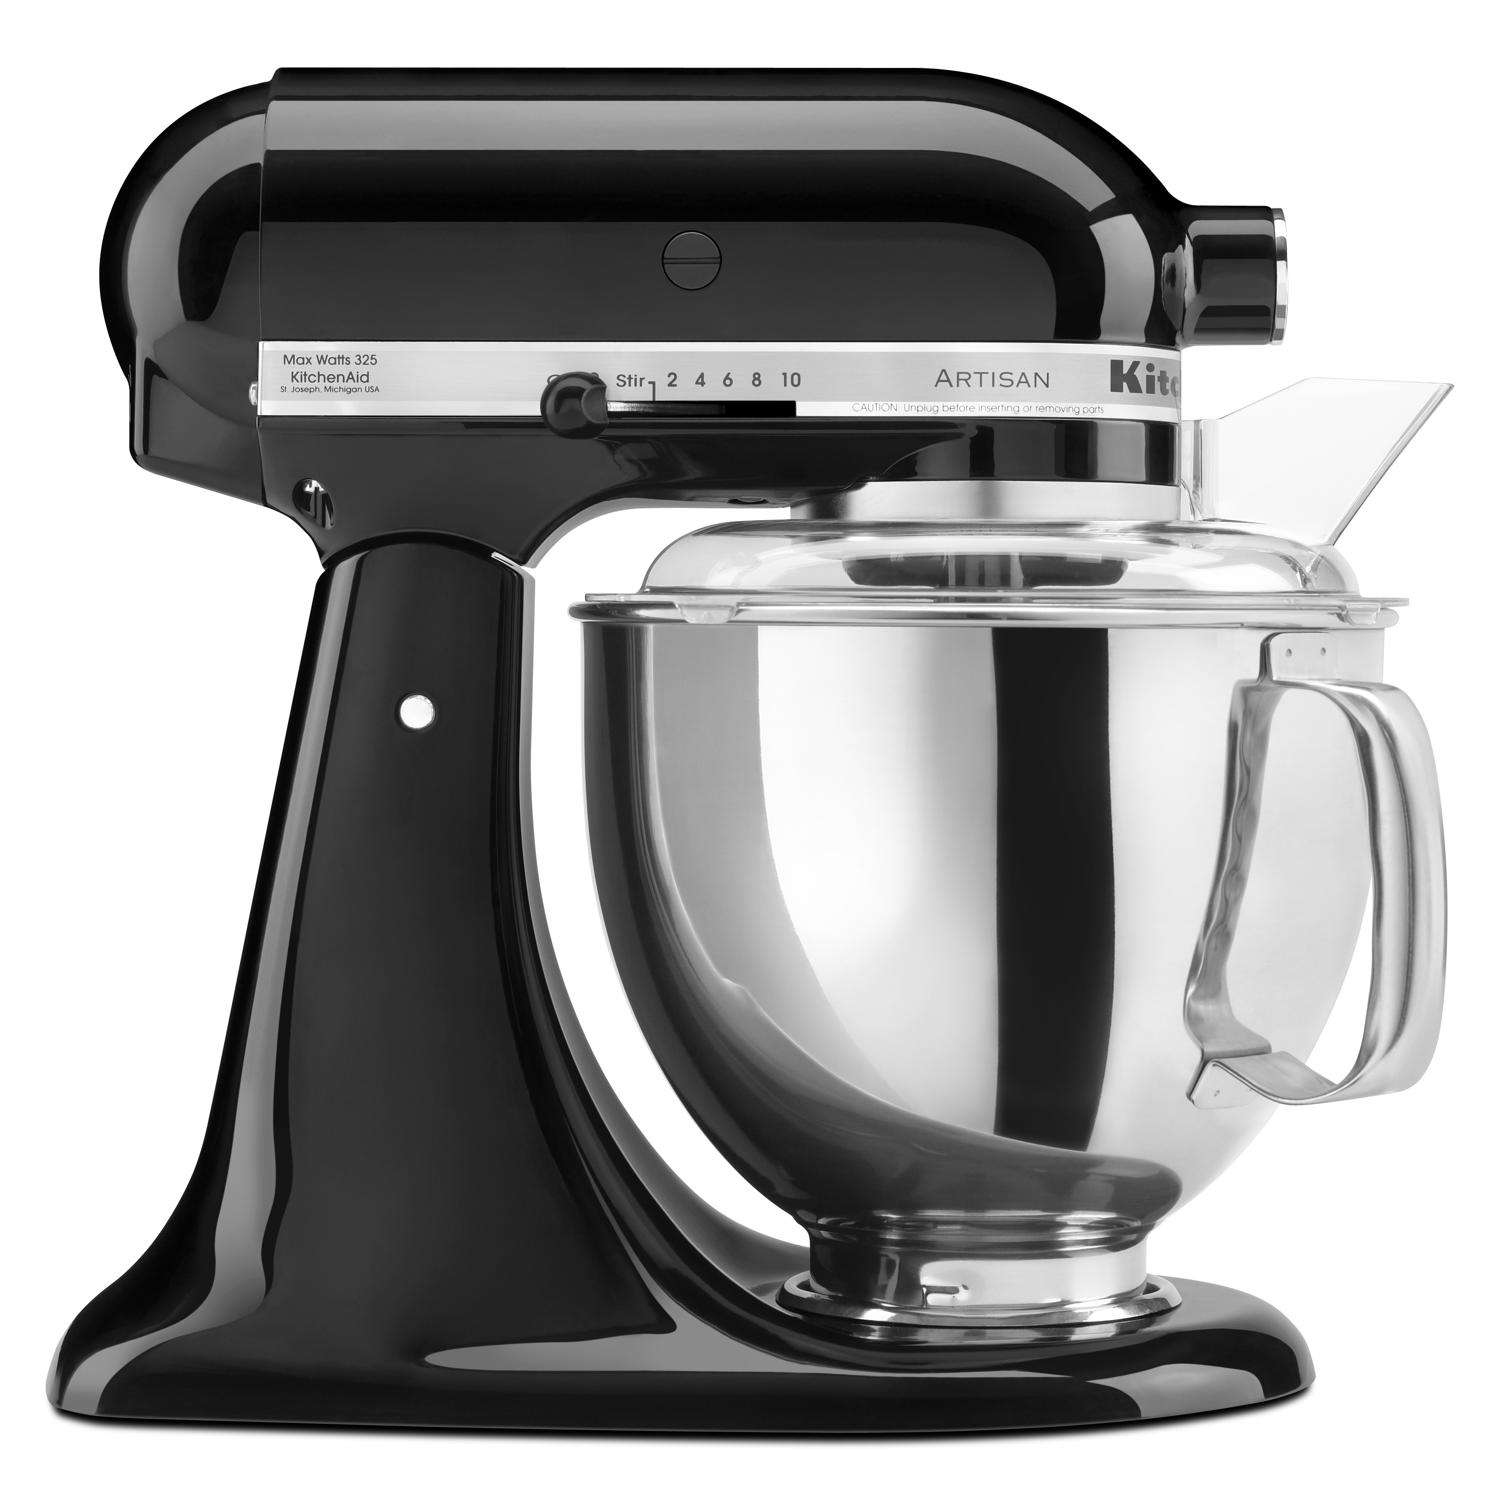 KitchenAid Stainless Steel Pasta Roller Stand Mixer Attachment - Ace  Hardware